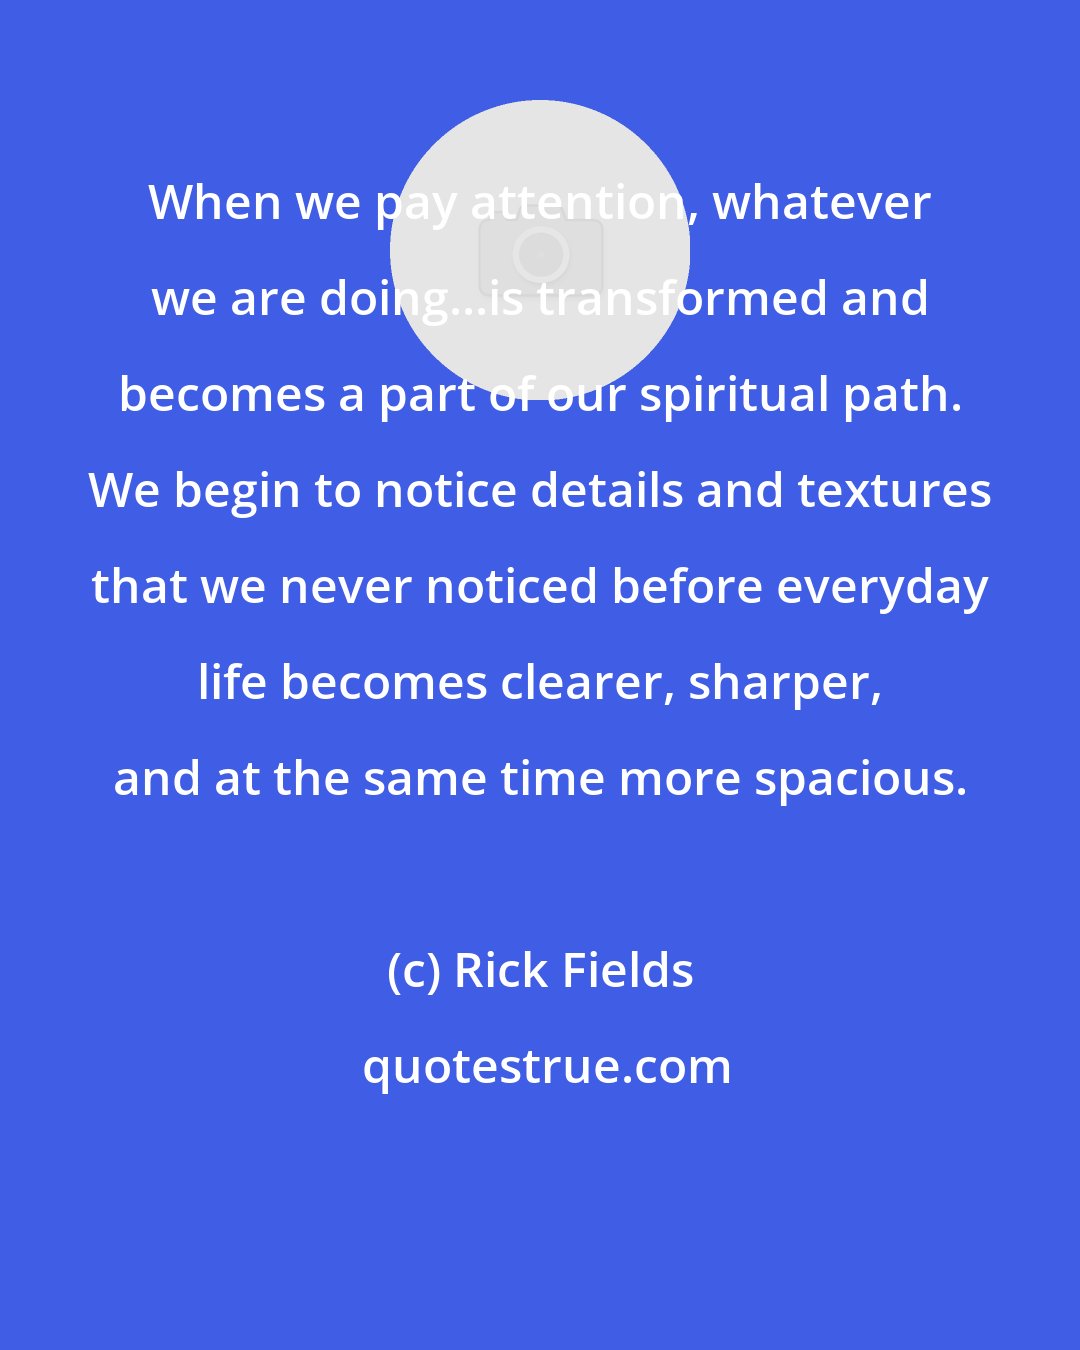 Rick Fields: When we pay attention, whatever we are doing...is transformed and becomes a part of our spiritual path. We begin to notice details and textures that we never noticed before everyday life becomes clearer, sharper, and at the same time more spacious.